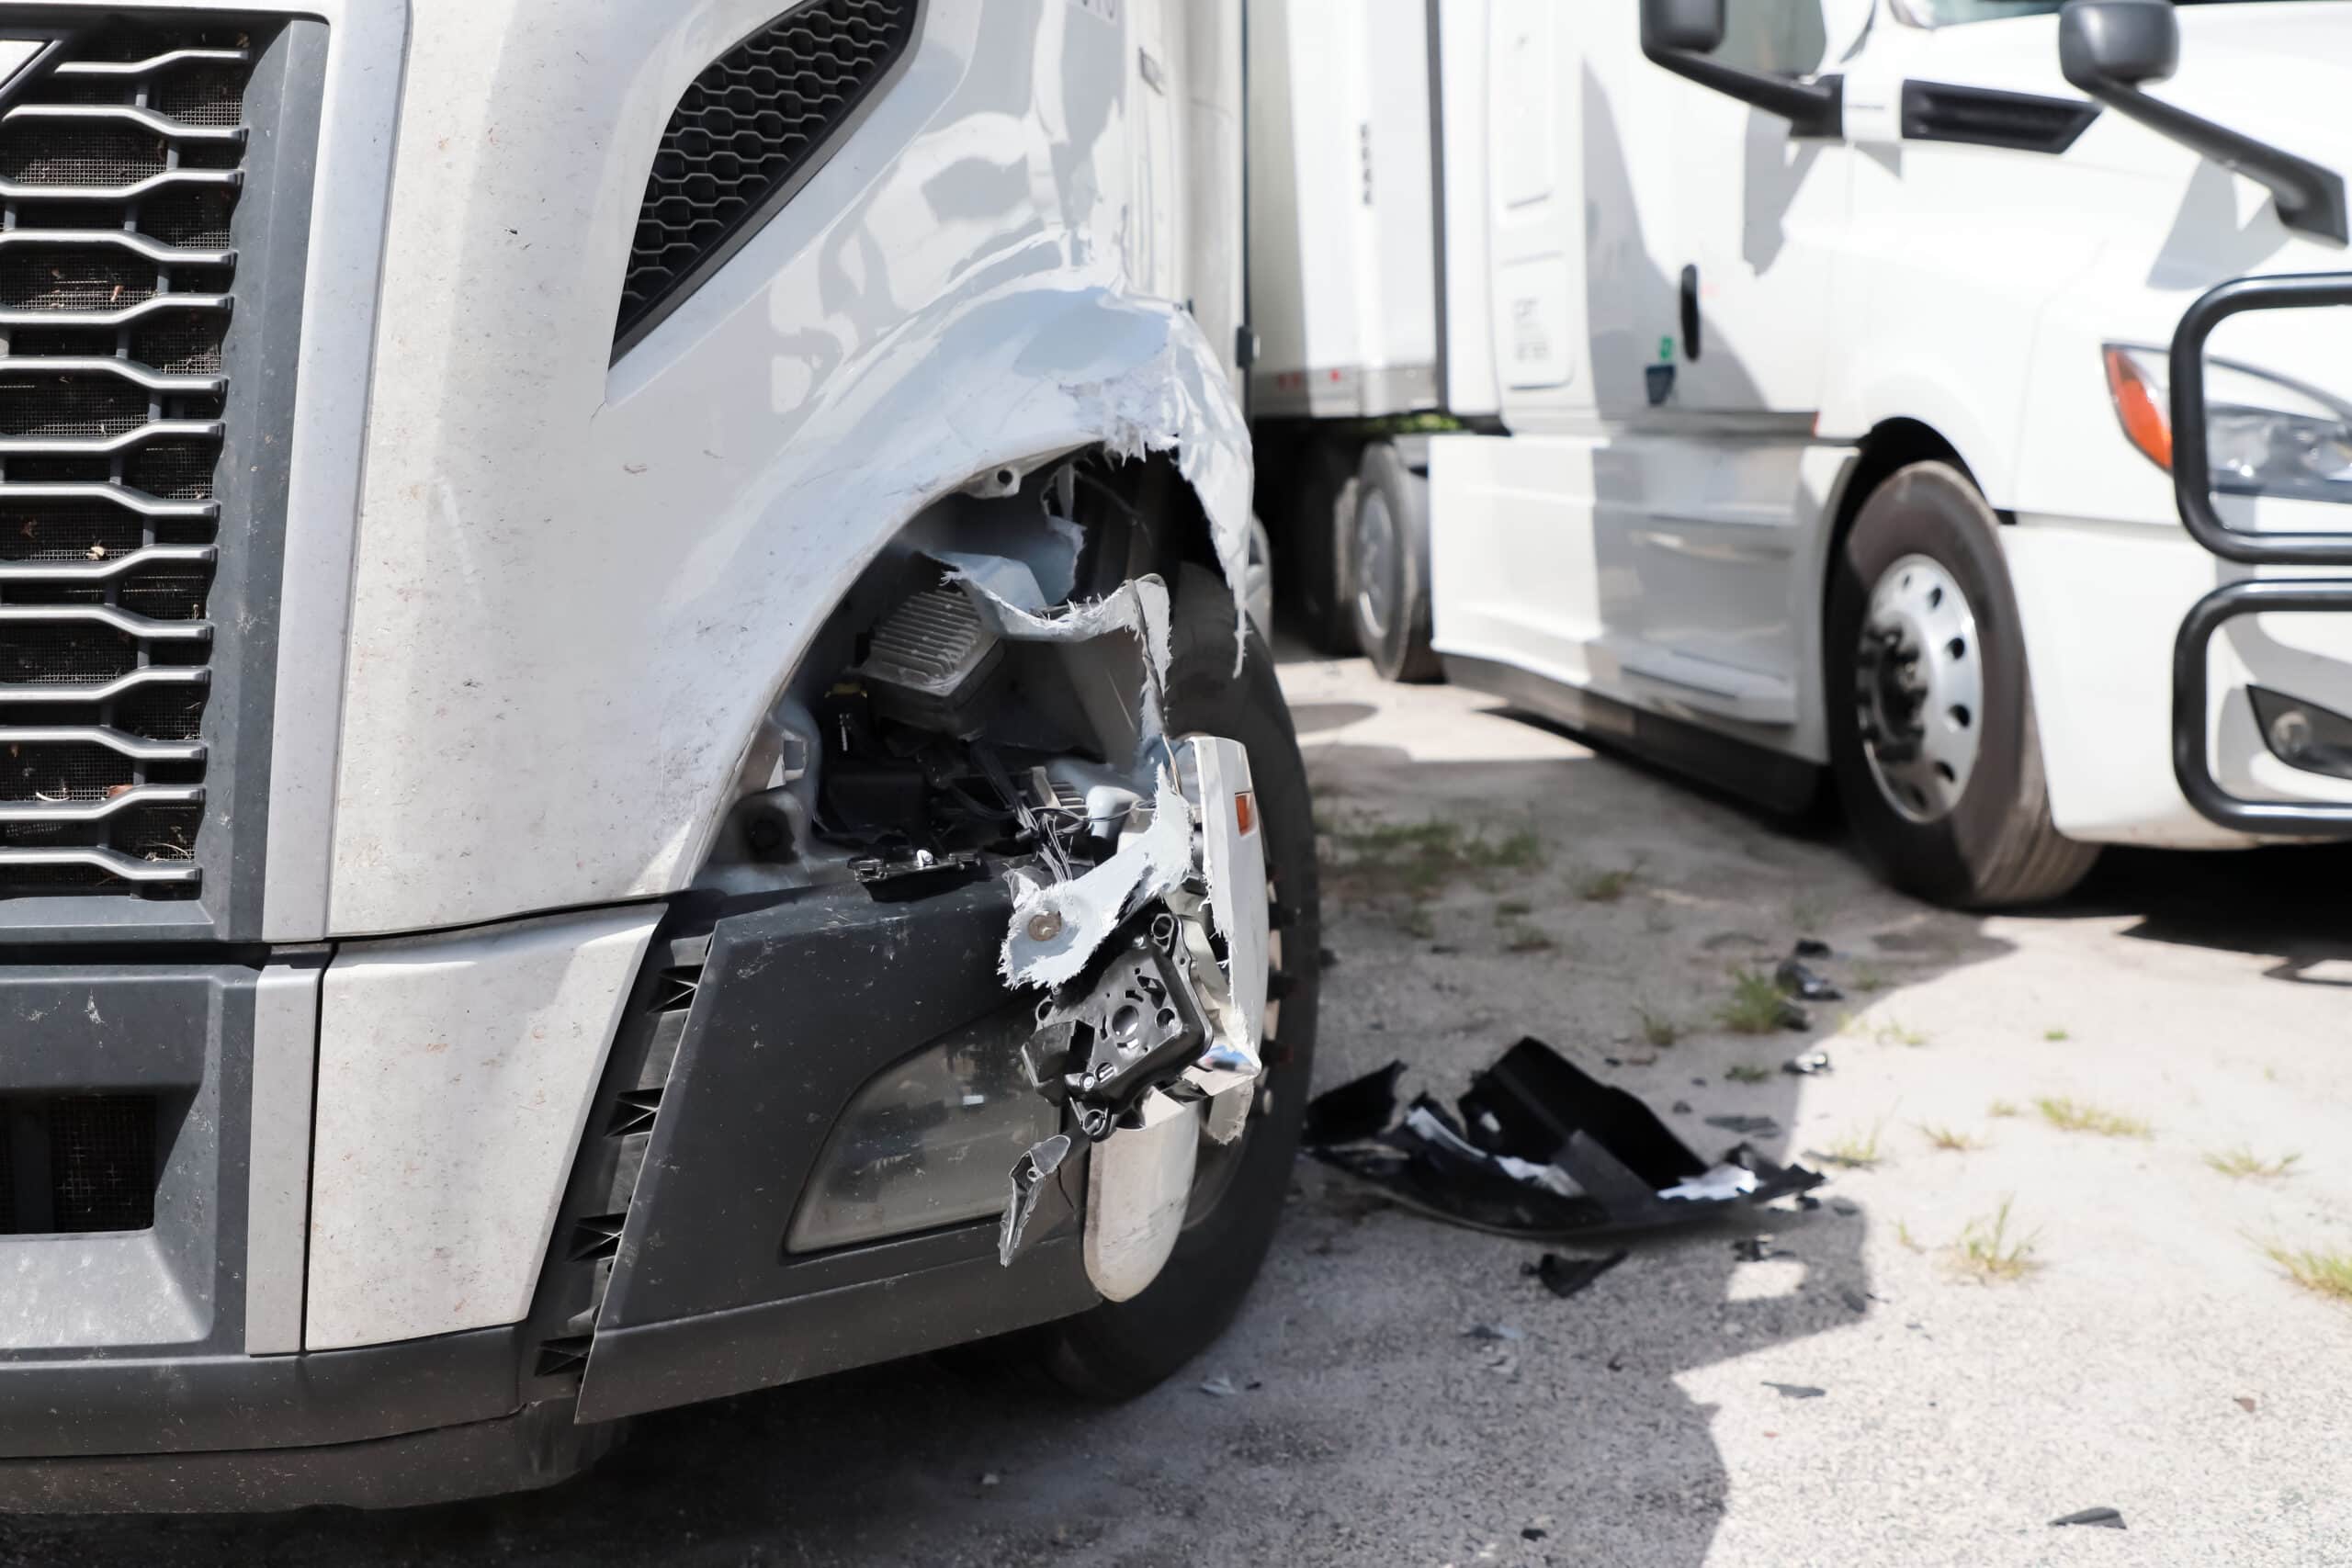 do truck drivers get fired for accidents